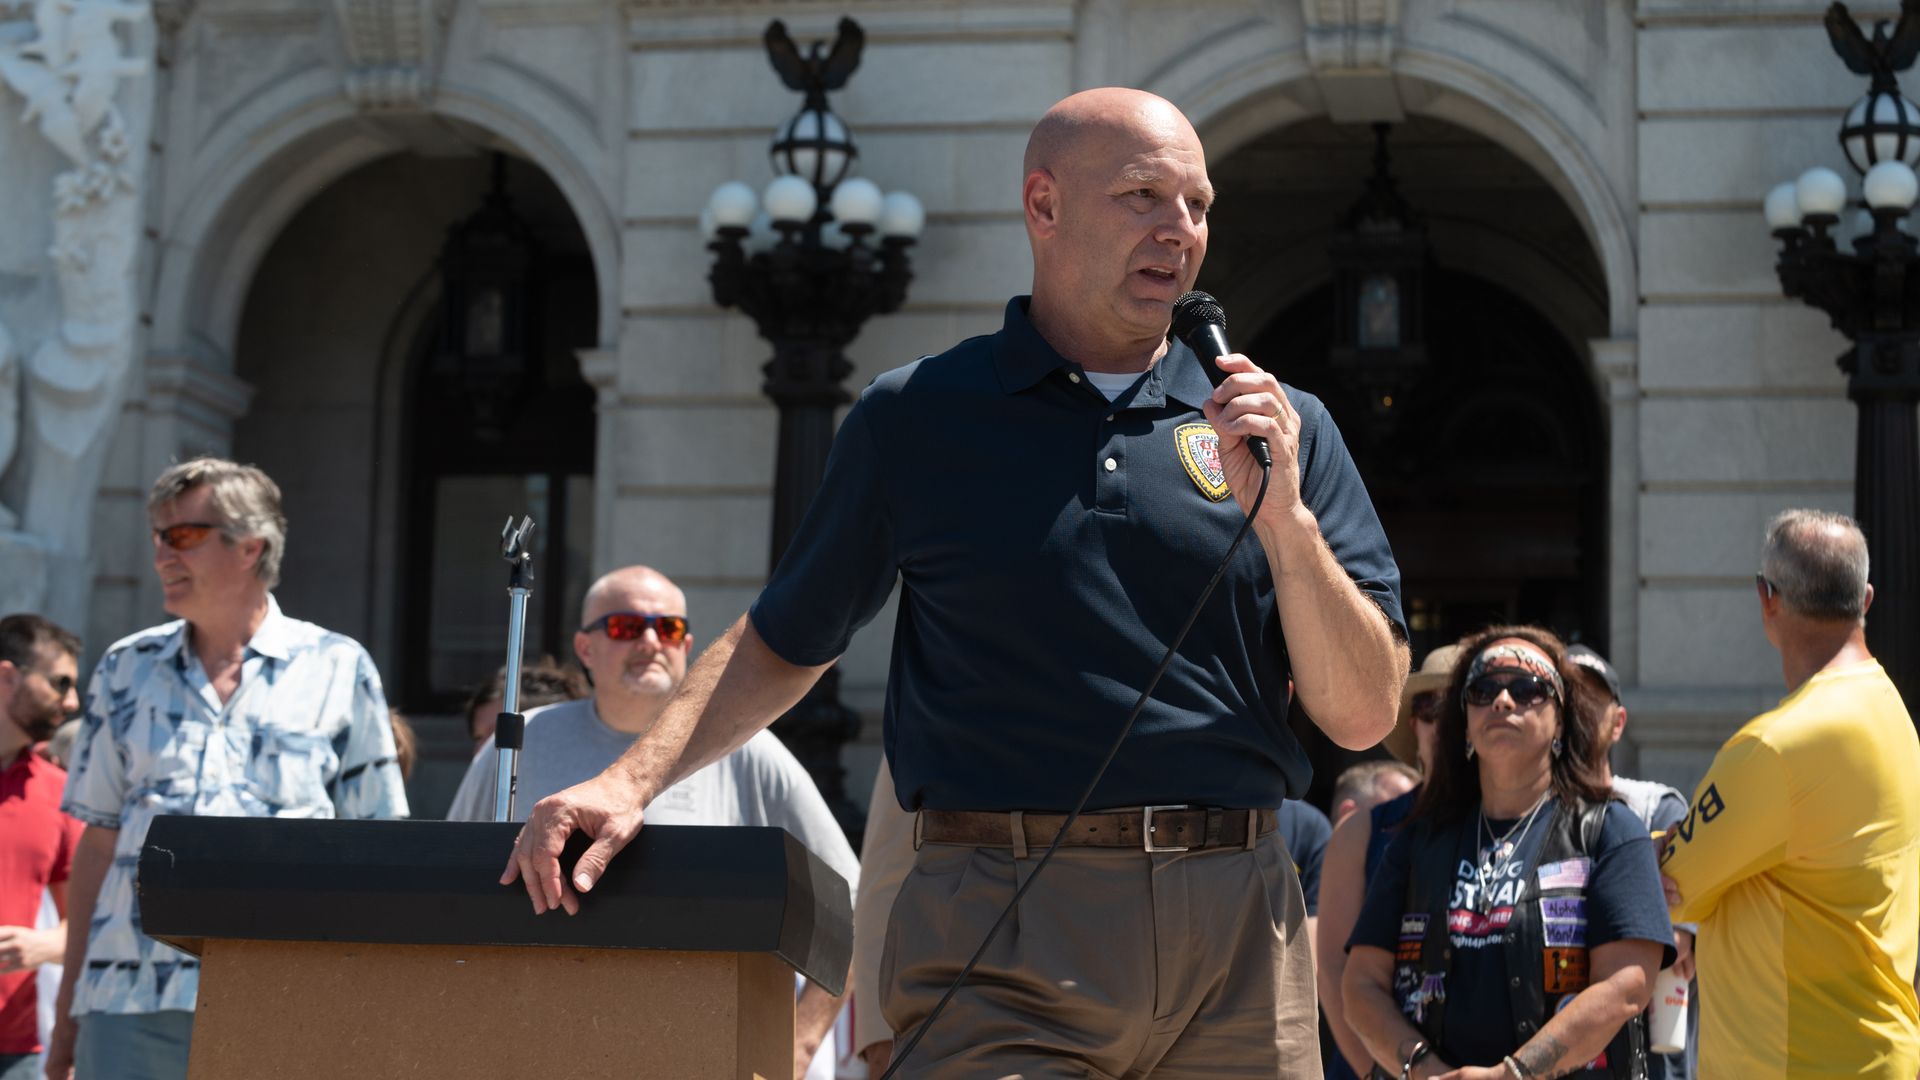 Pennsylvania state Sen. Doug Mastriano speaking at a rally in Harrisburg in June 2021.